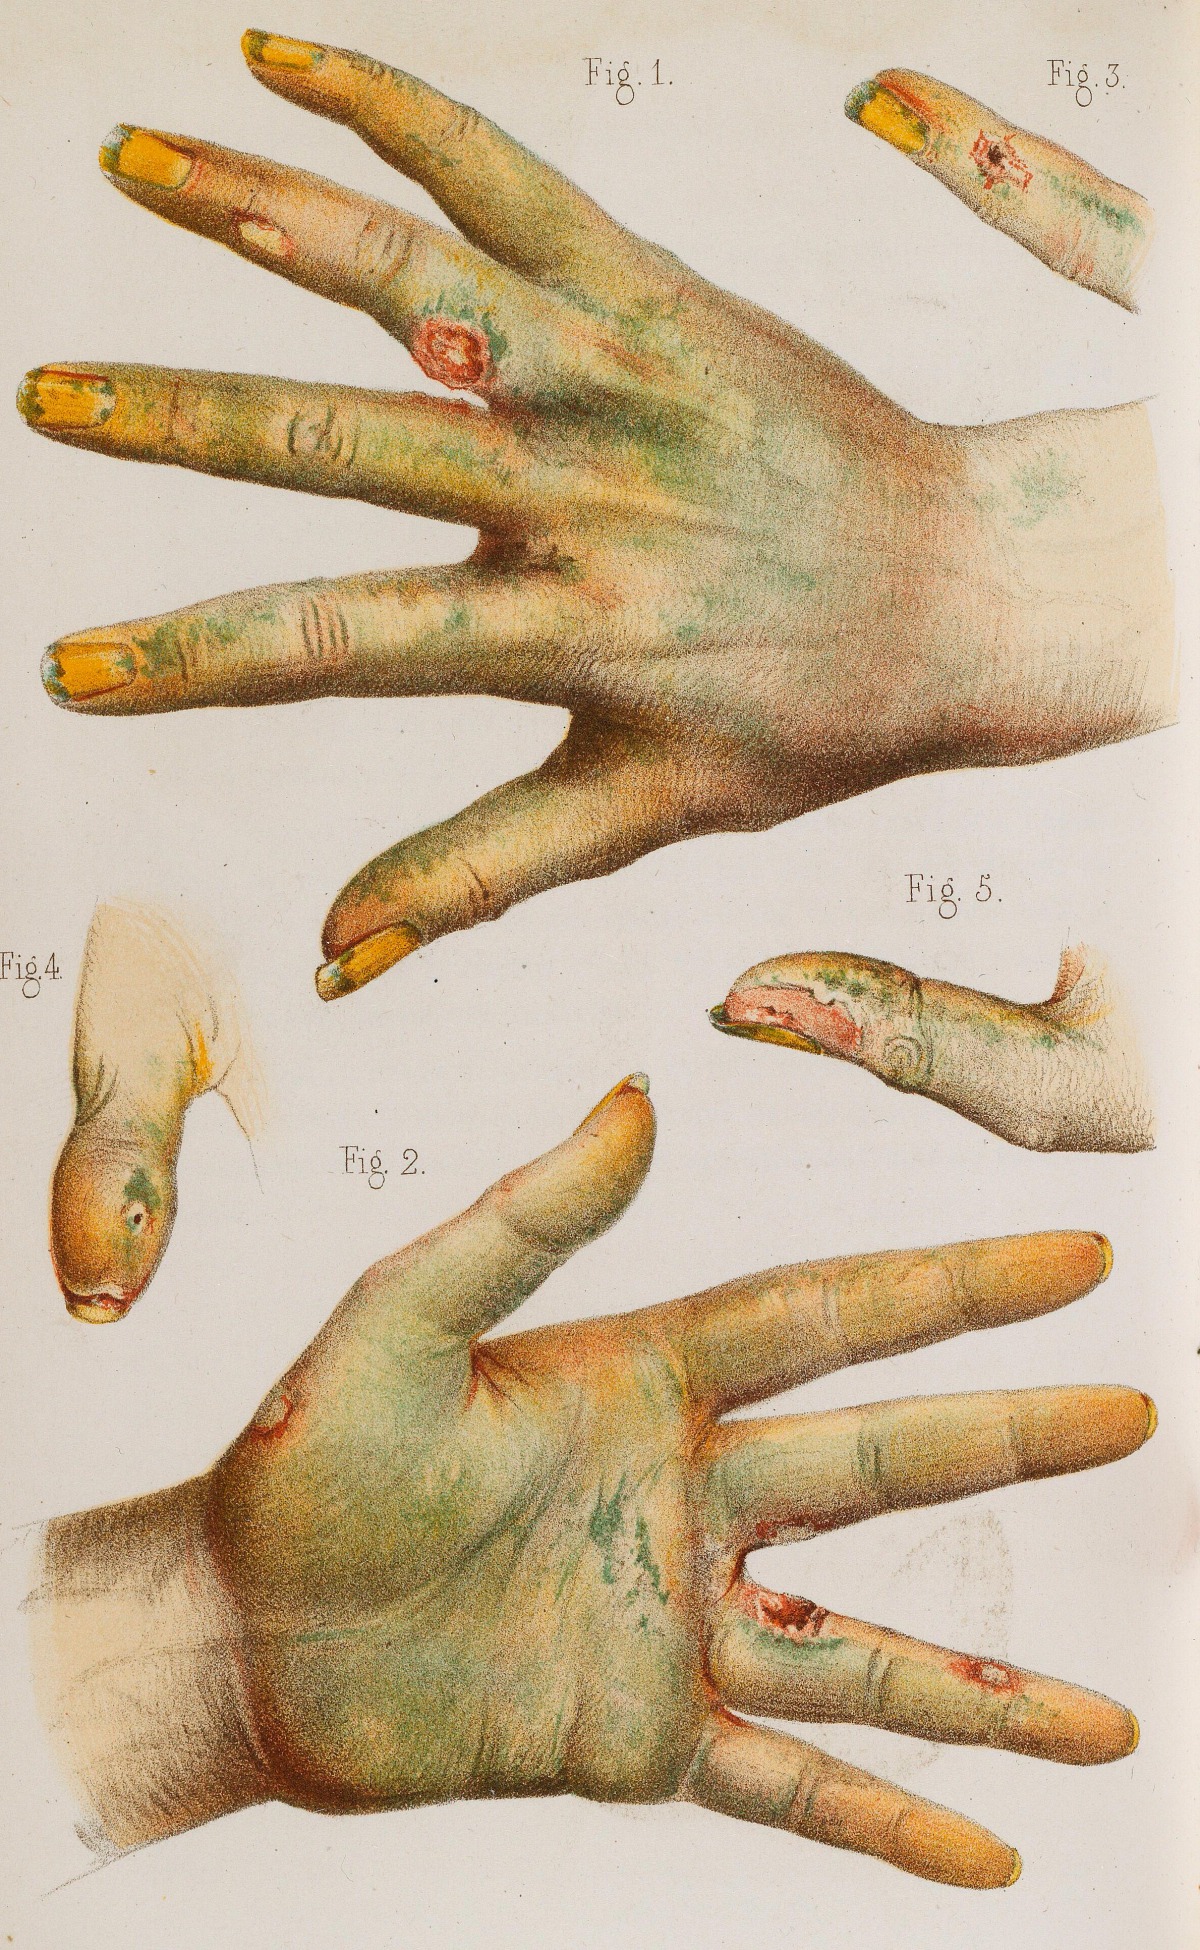 19th century drawing of hands damaged by arsenic green